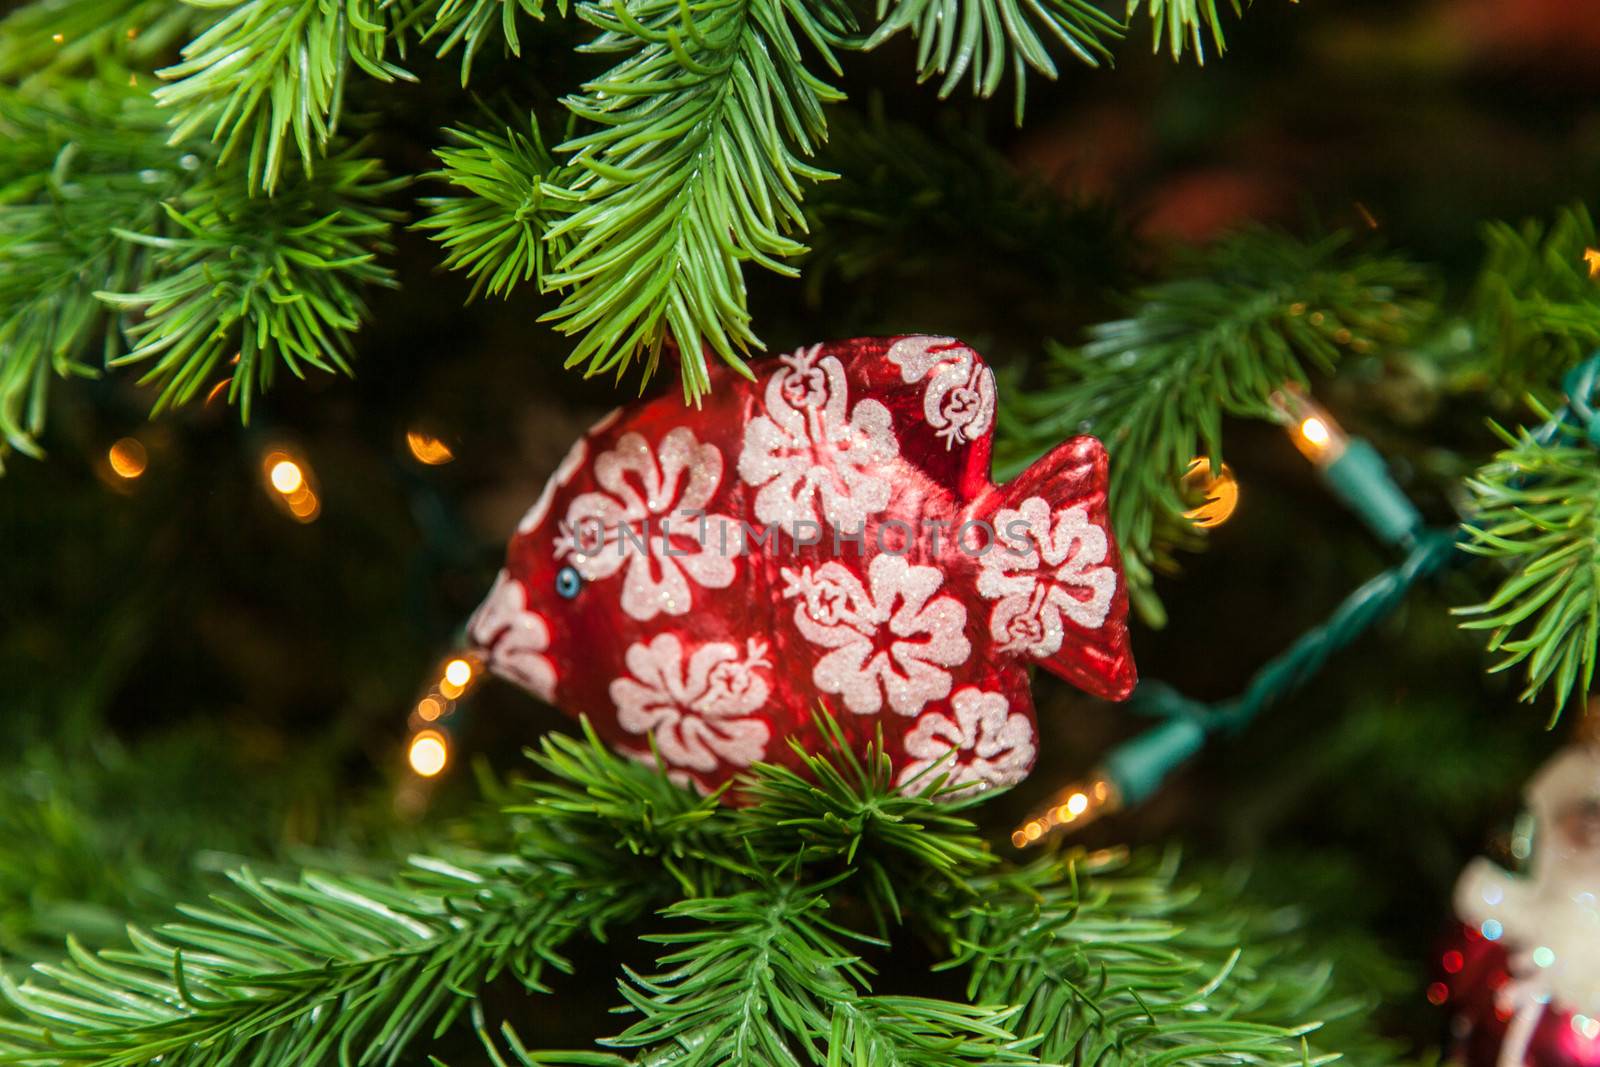 Christmas tree decorations by melastmohican